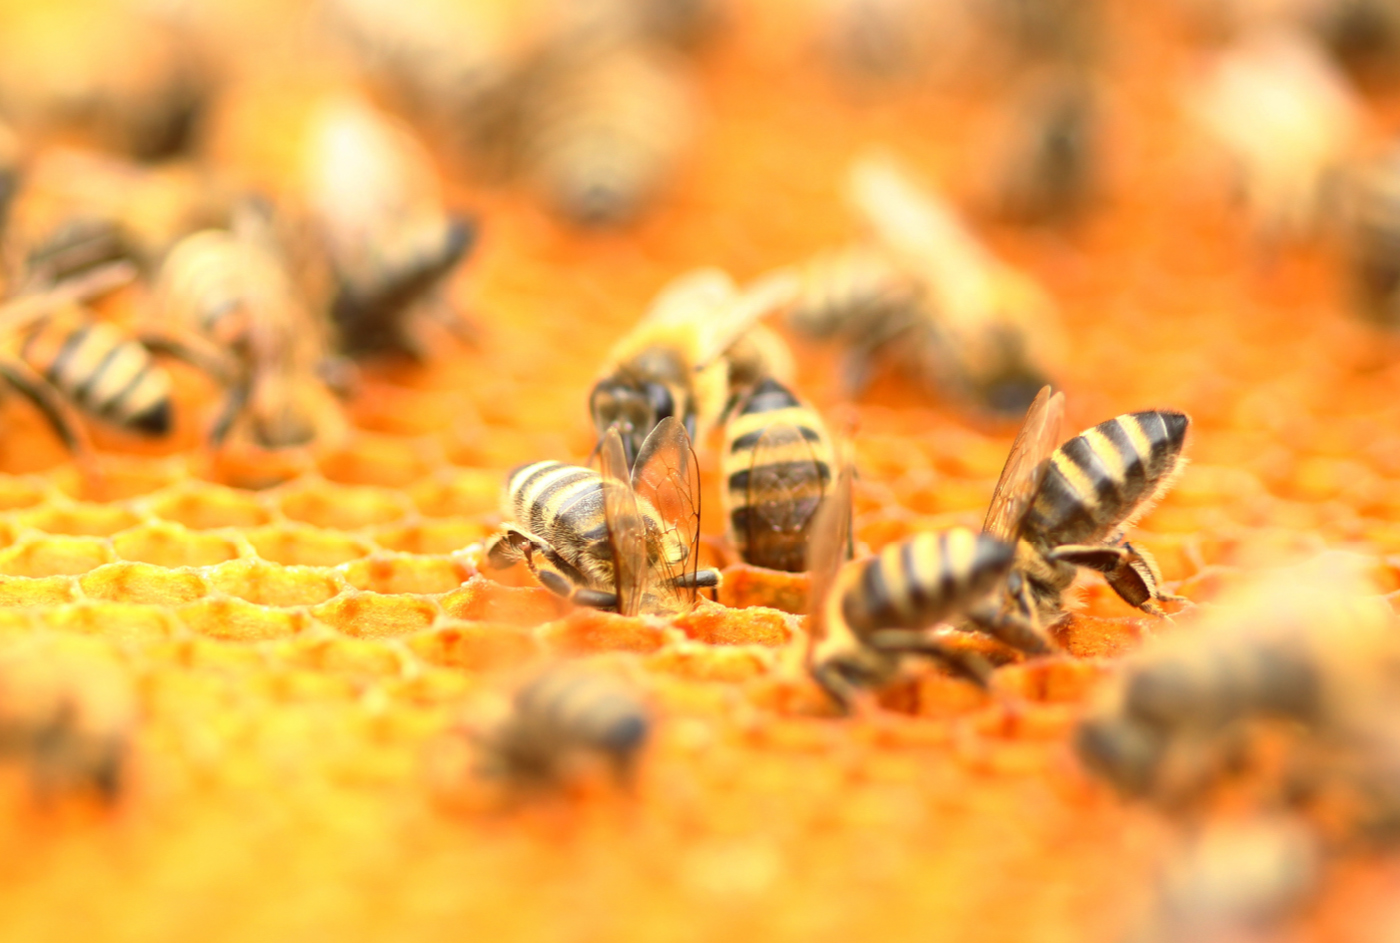 close up image of bees in a hive